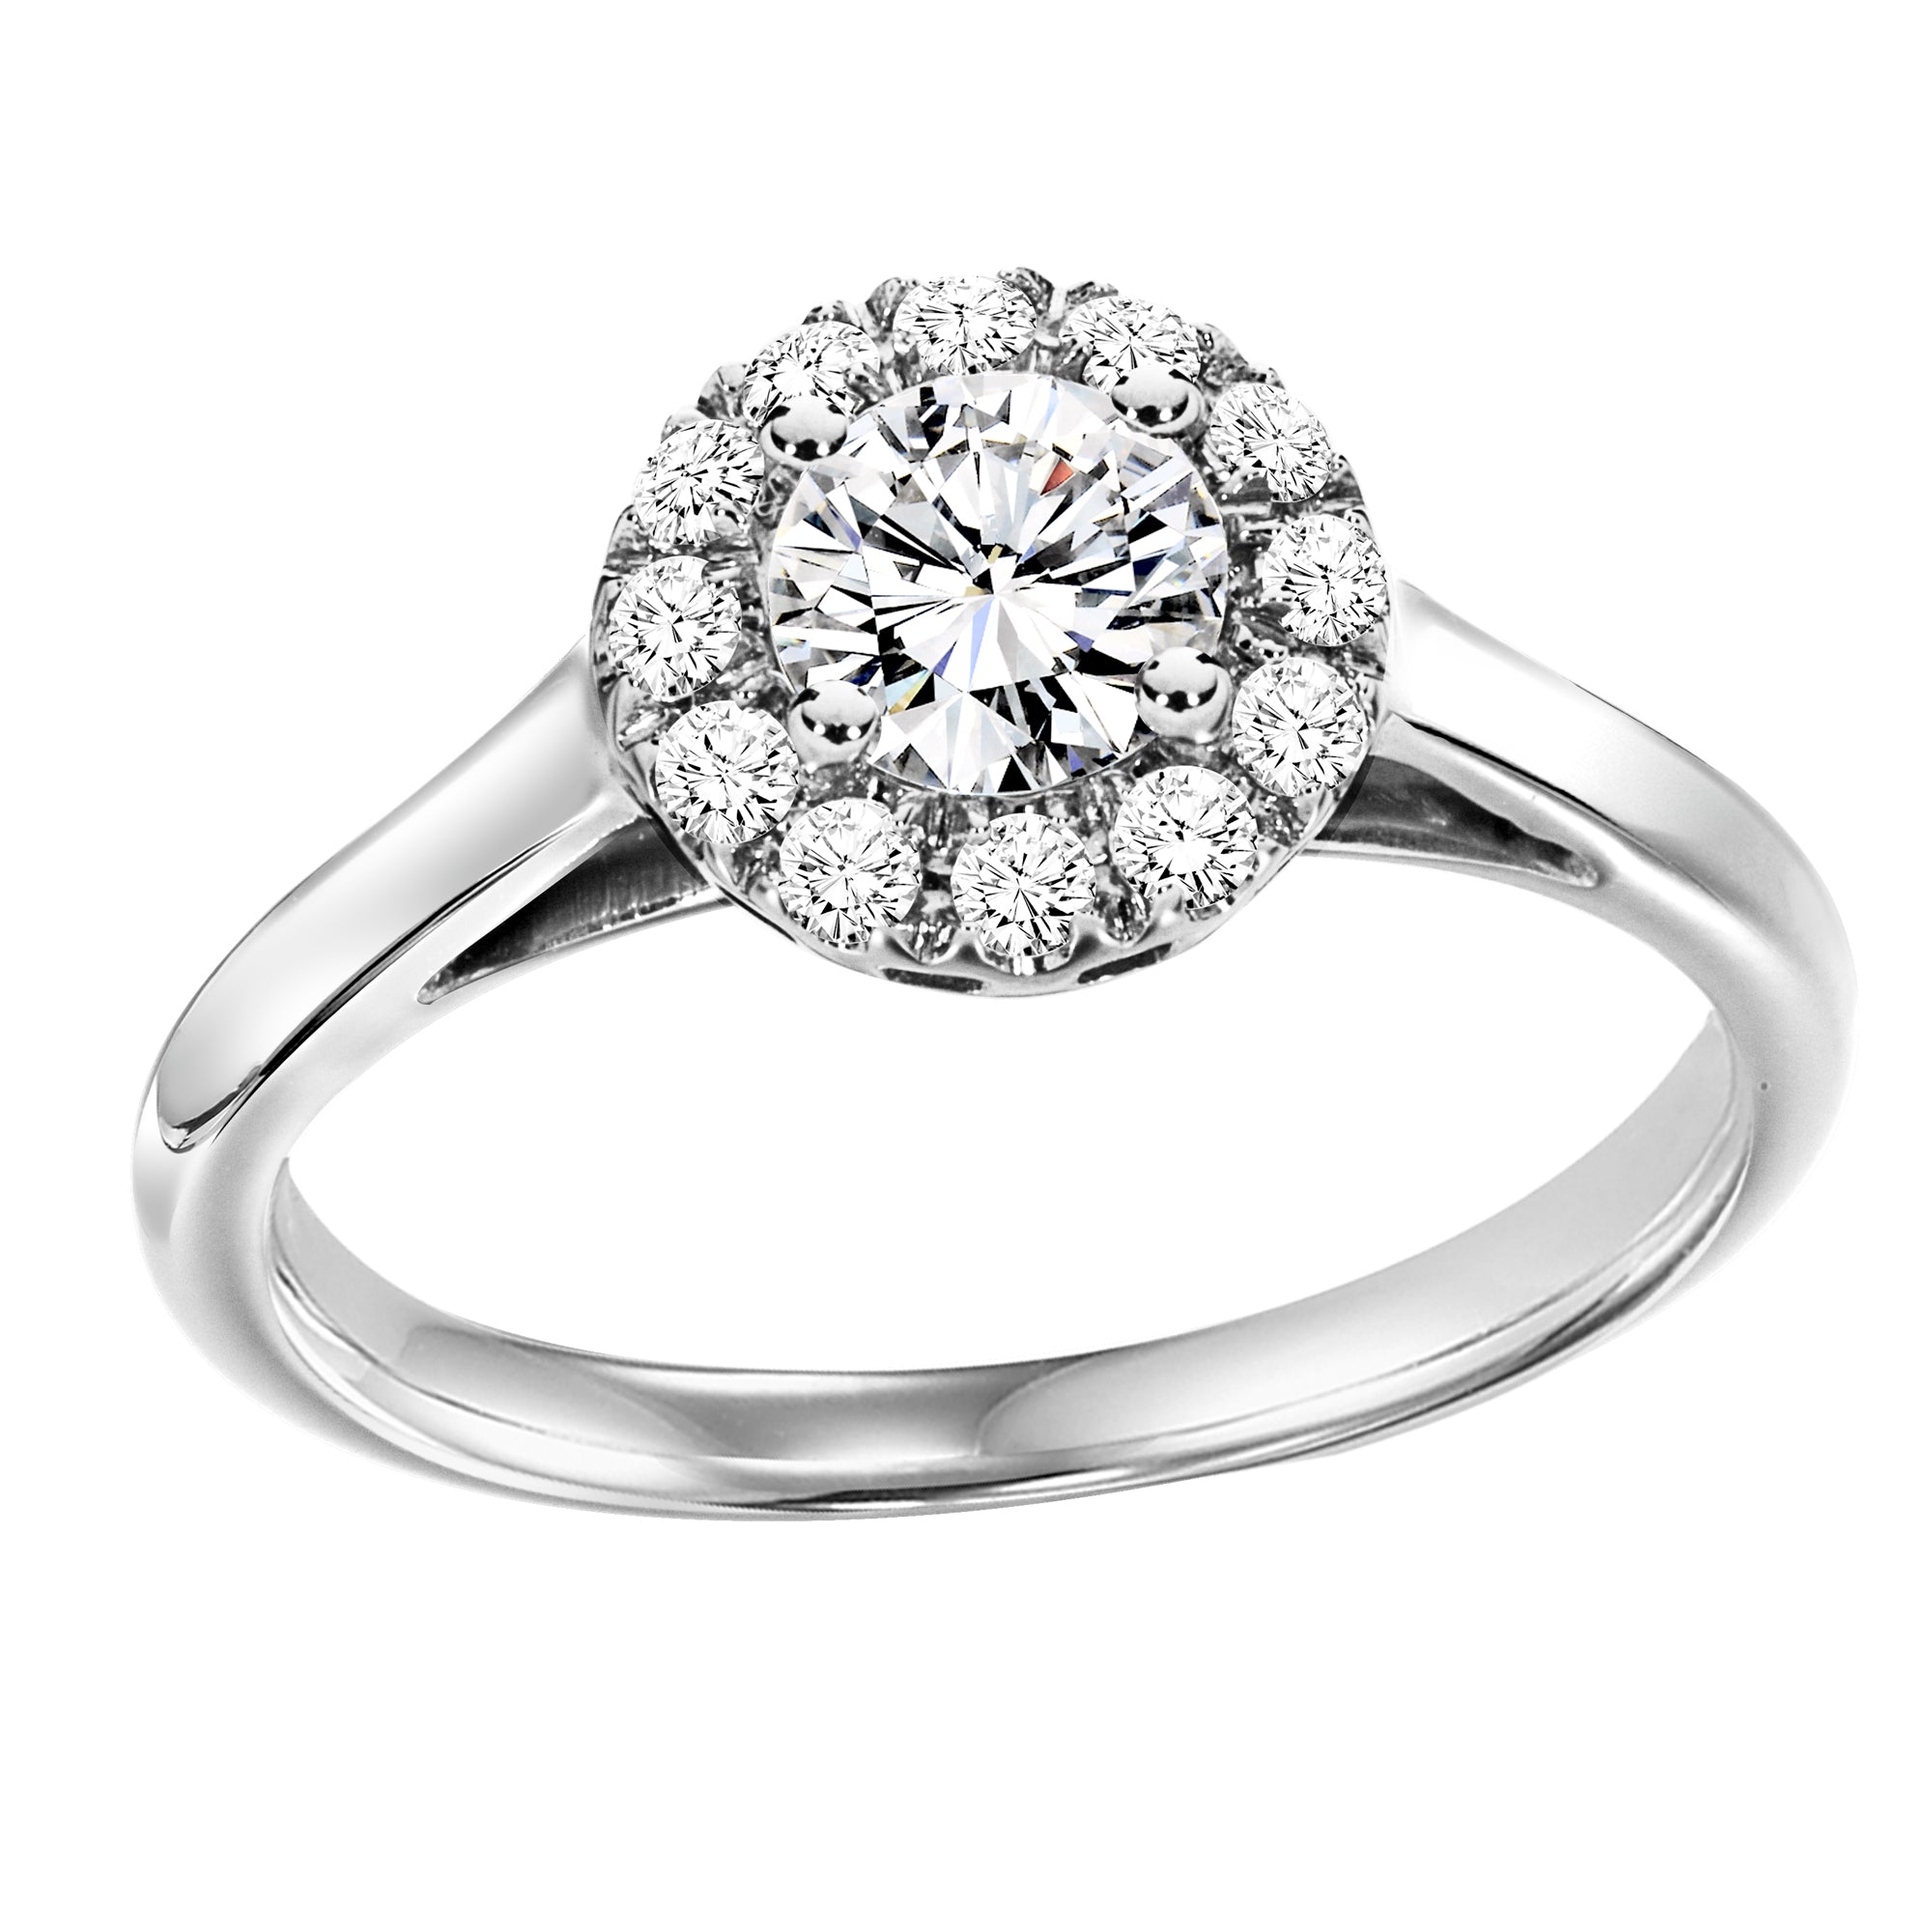 Sterling Silver Cubic Zirconia 0.75ct Ring - AK1033 - Hallmark Jewellers Formby & The Jewellers Bench Widnes